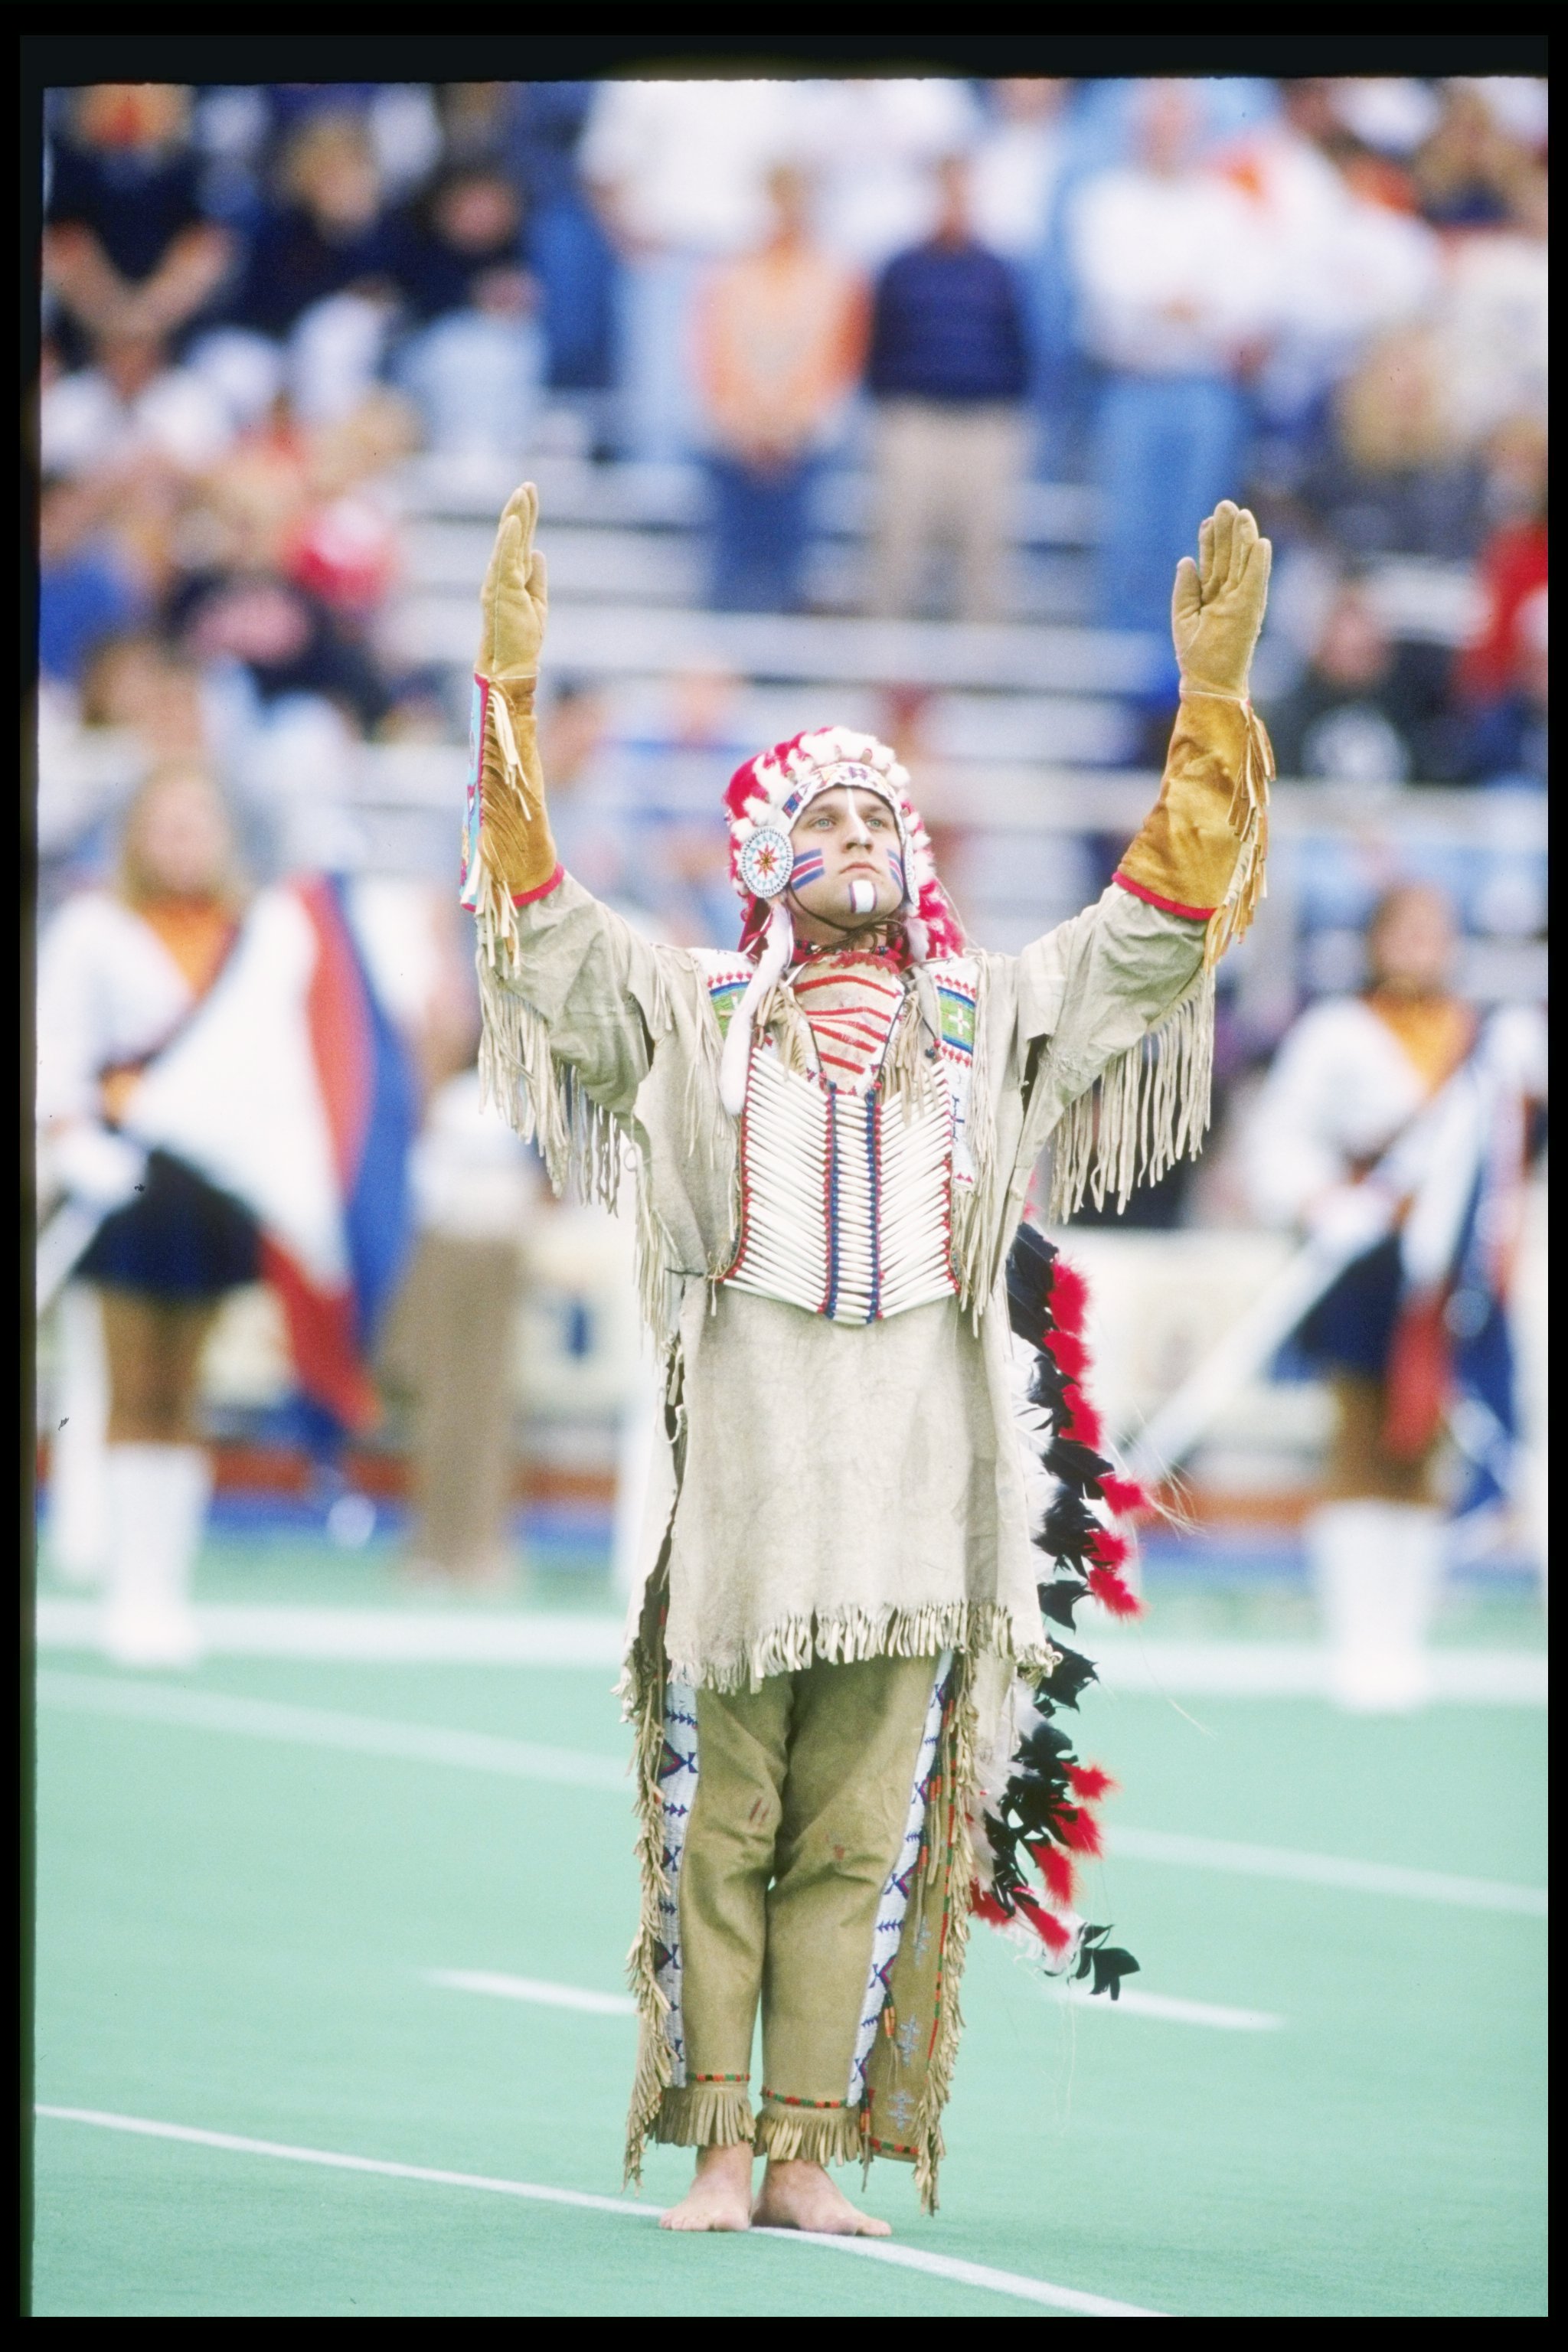 15 Oct 1994: Mascot stands on the field during a game between the Iowa Hawkeyes and the Illinois Fighting Illini at Memorial Stadium in Champaign, Illinois. Illinois won the game 47-7.